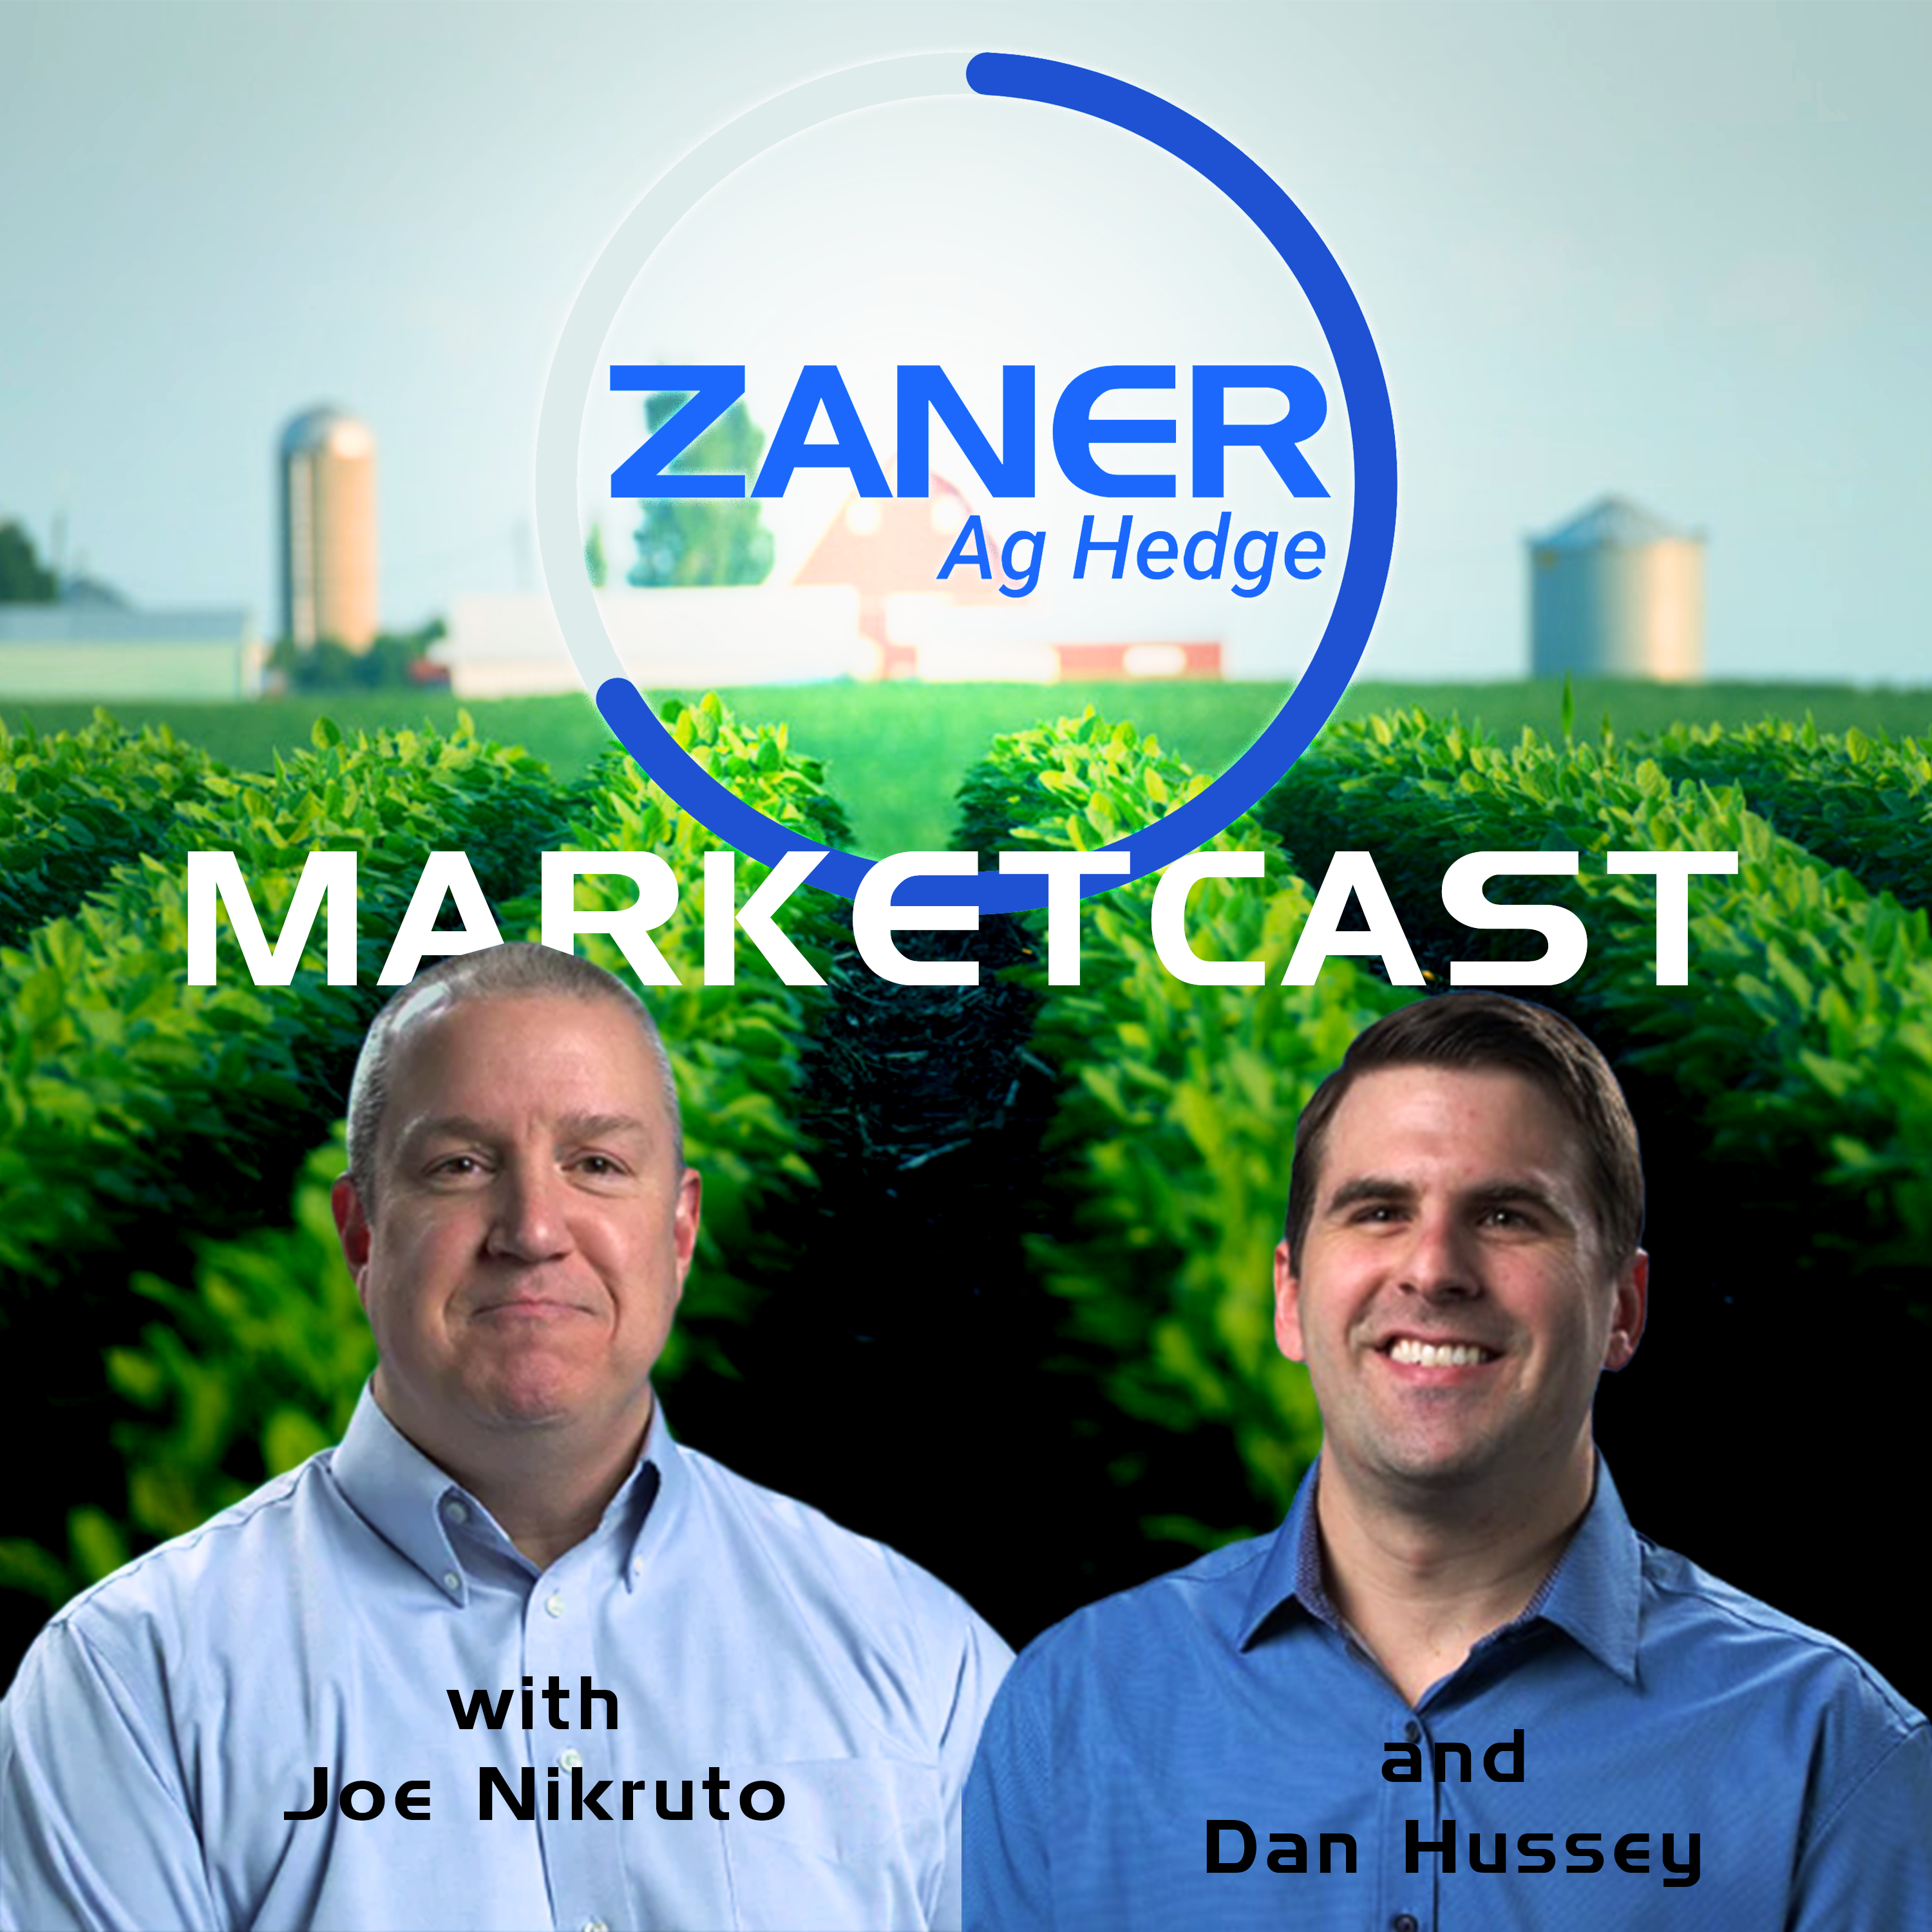 Zaner Marketcast Episode 4: HPAI Outbreak and What You Need To Know